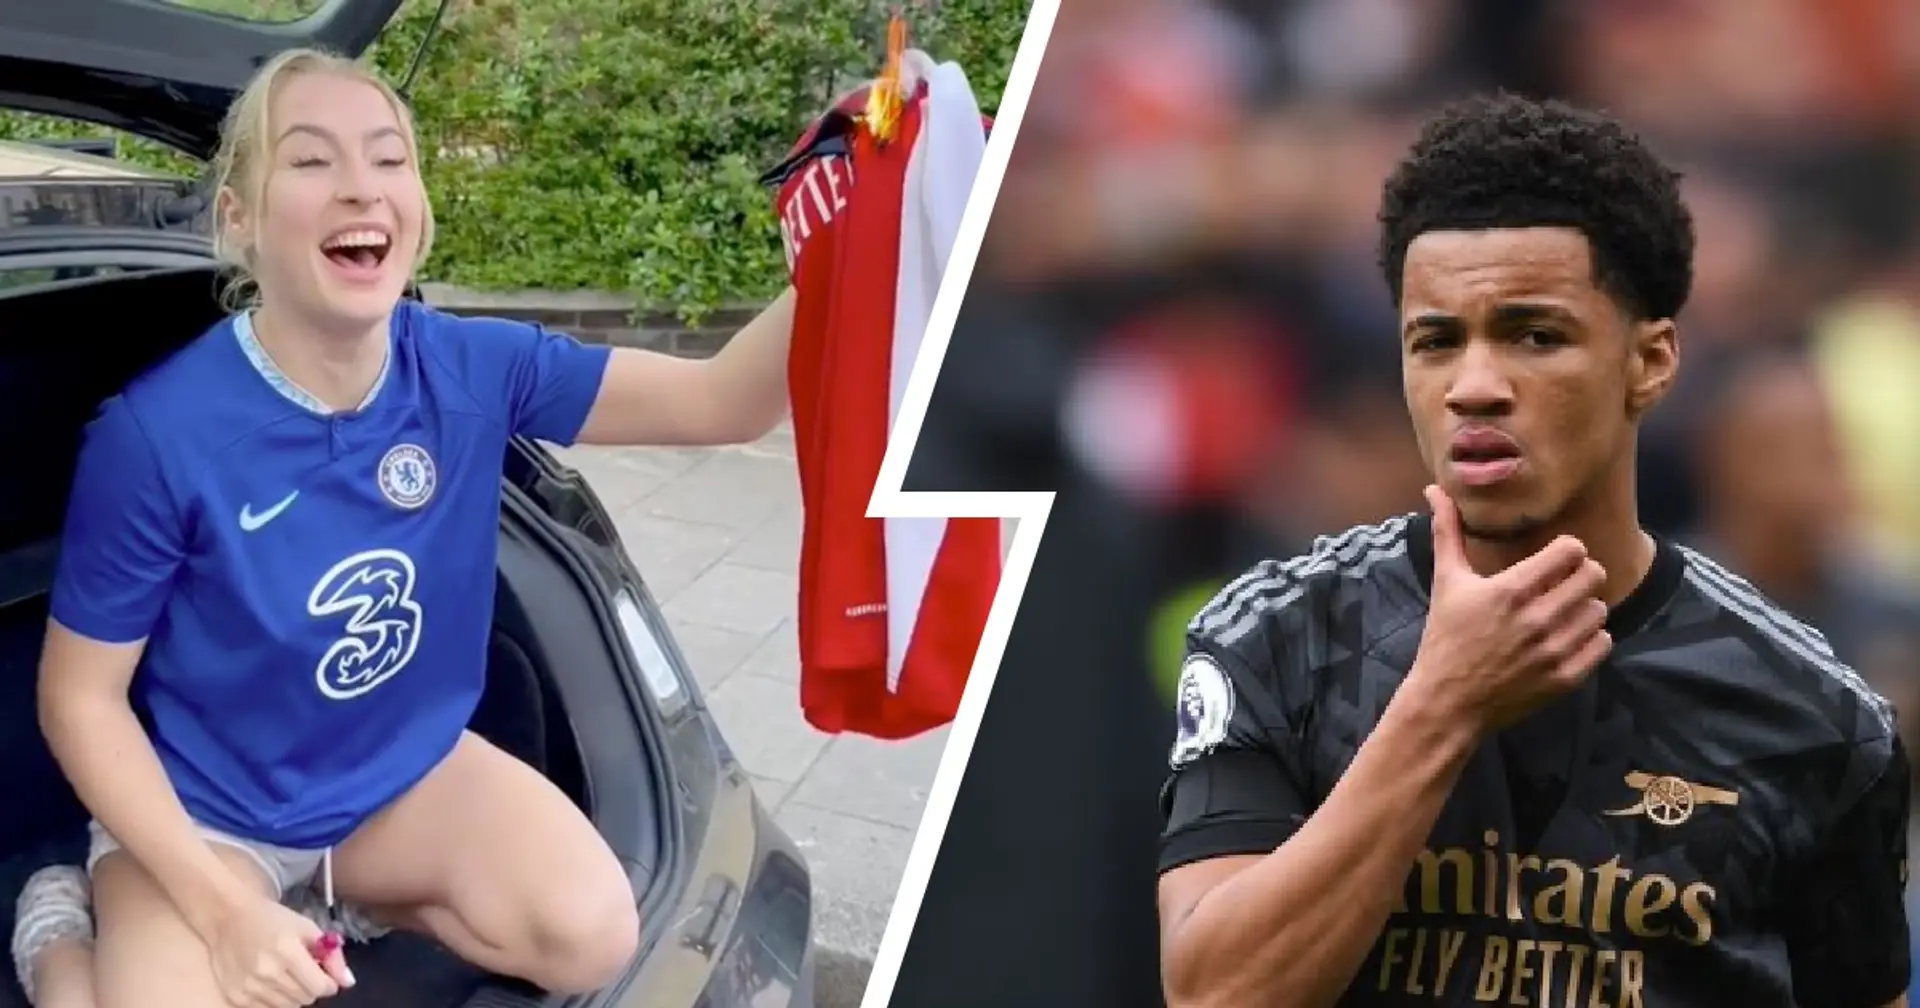 OnlyFans star sets Arsenal shirt on fire and 2 other under-radar Chelsea stories